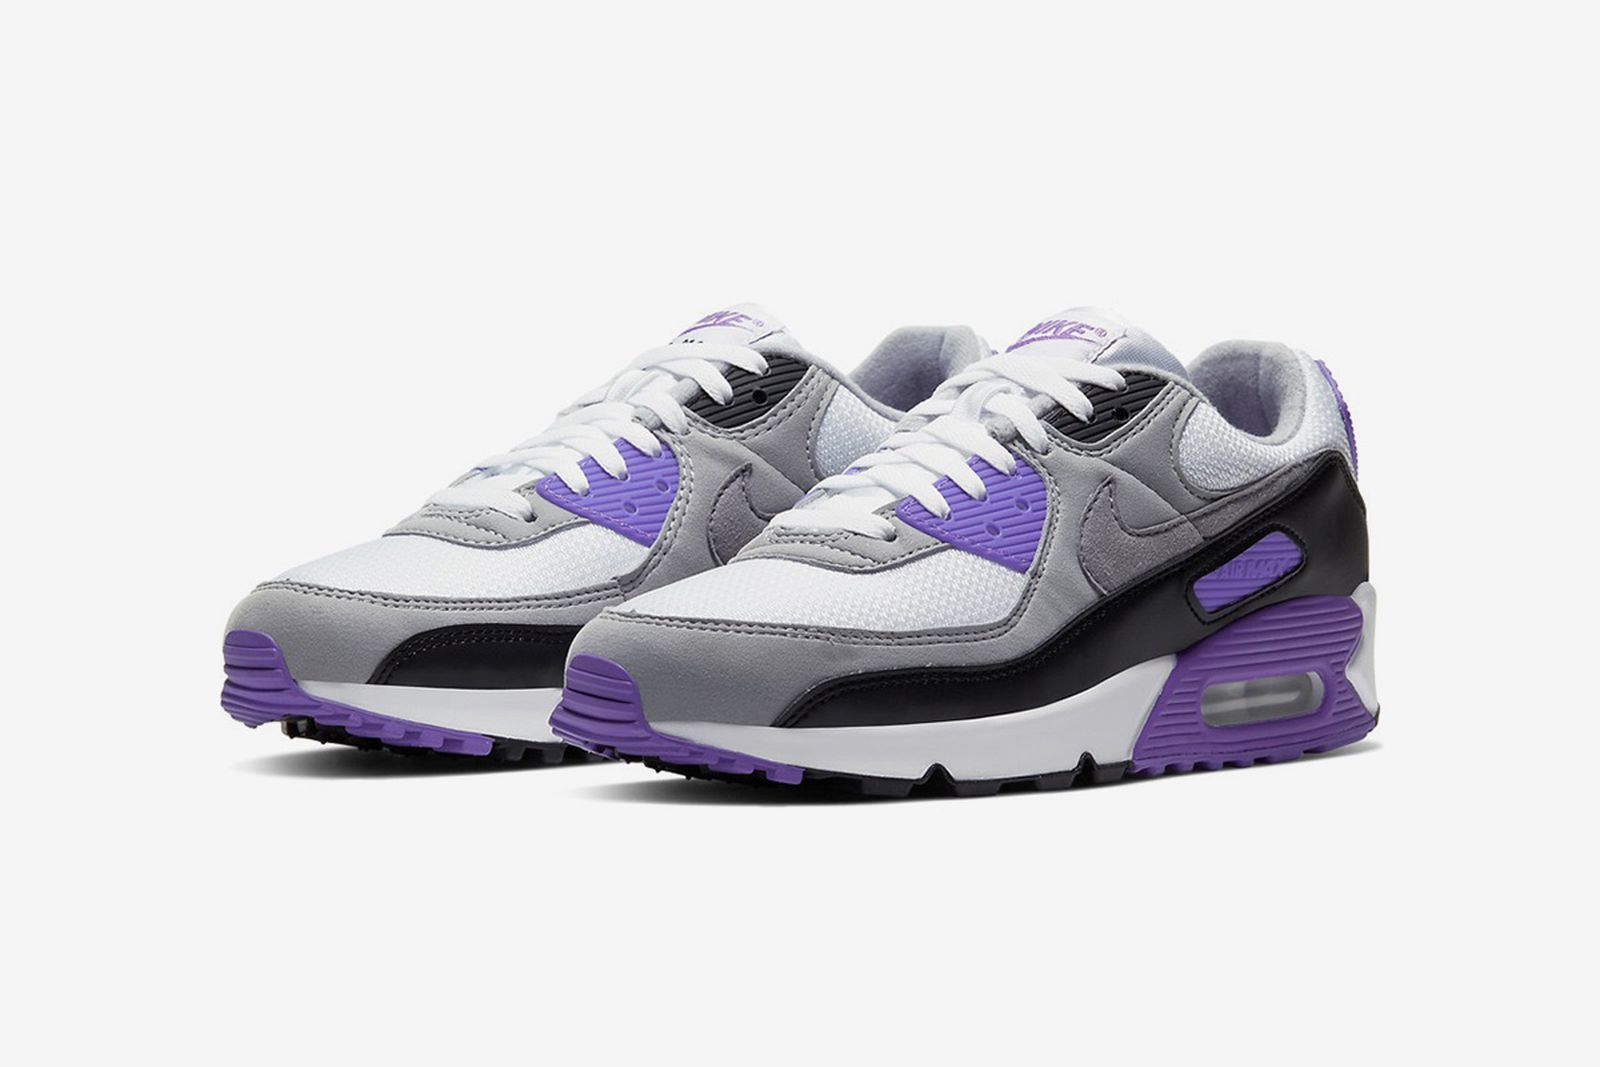 nike-air-max-90-30th-anniversary-colorways-release-date-price-1-08